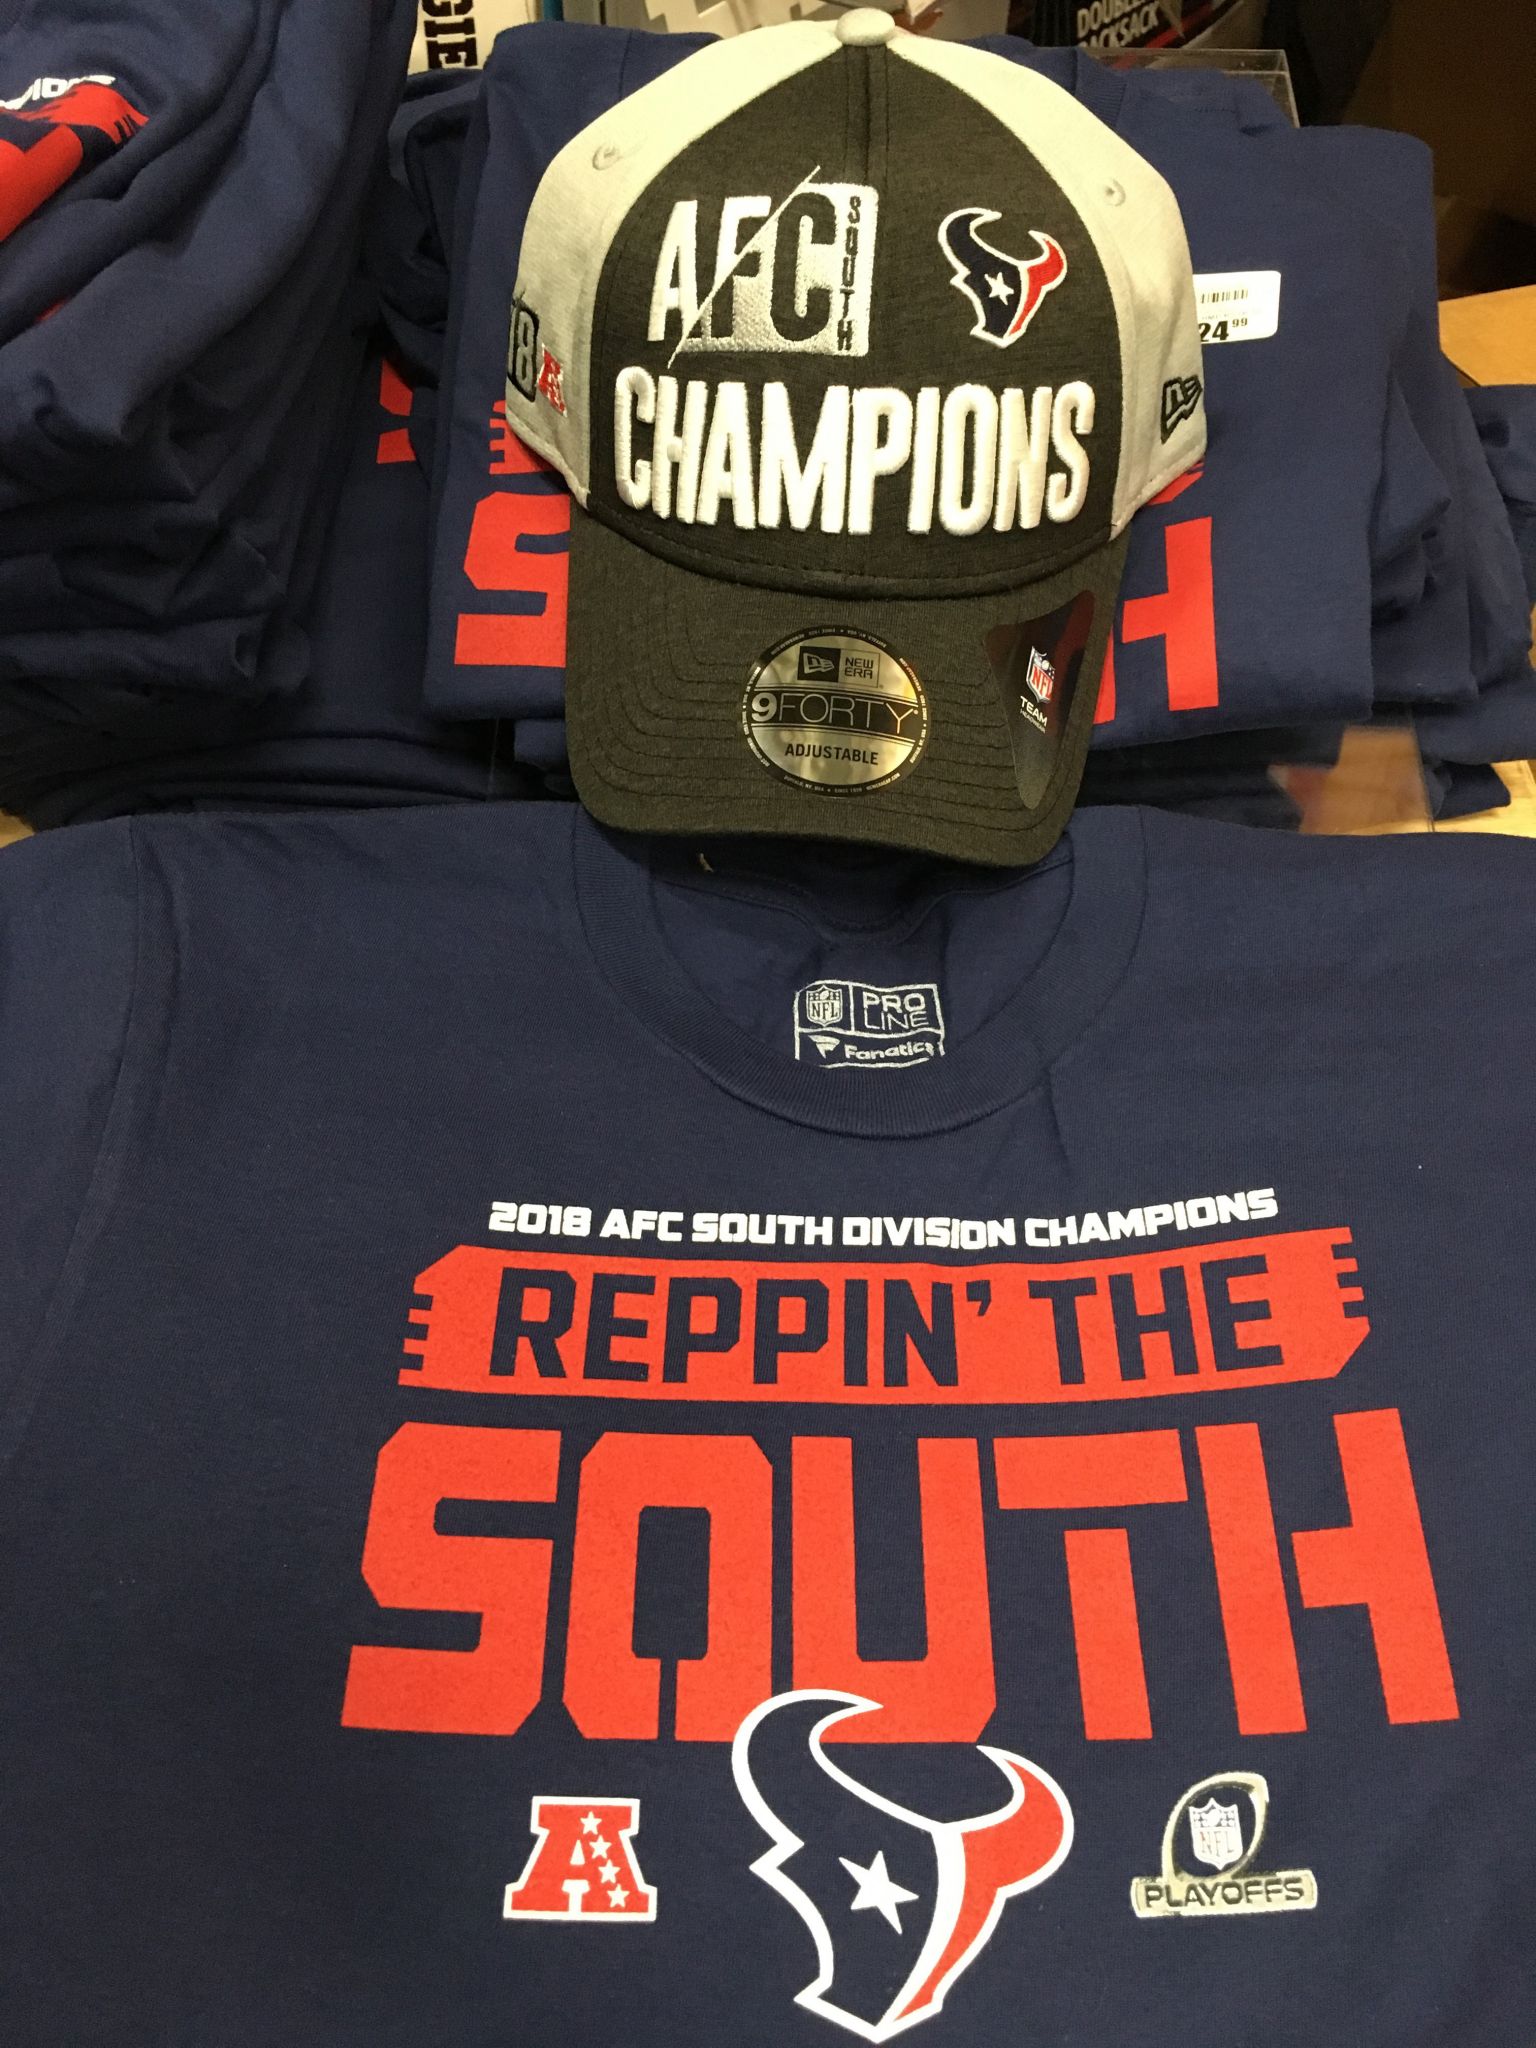 Here's what Texans' AFC South champs 